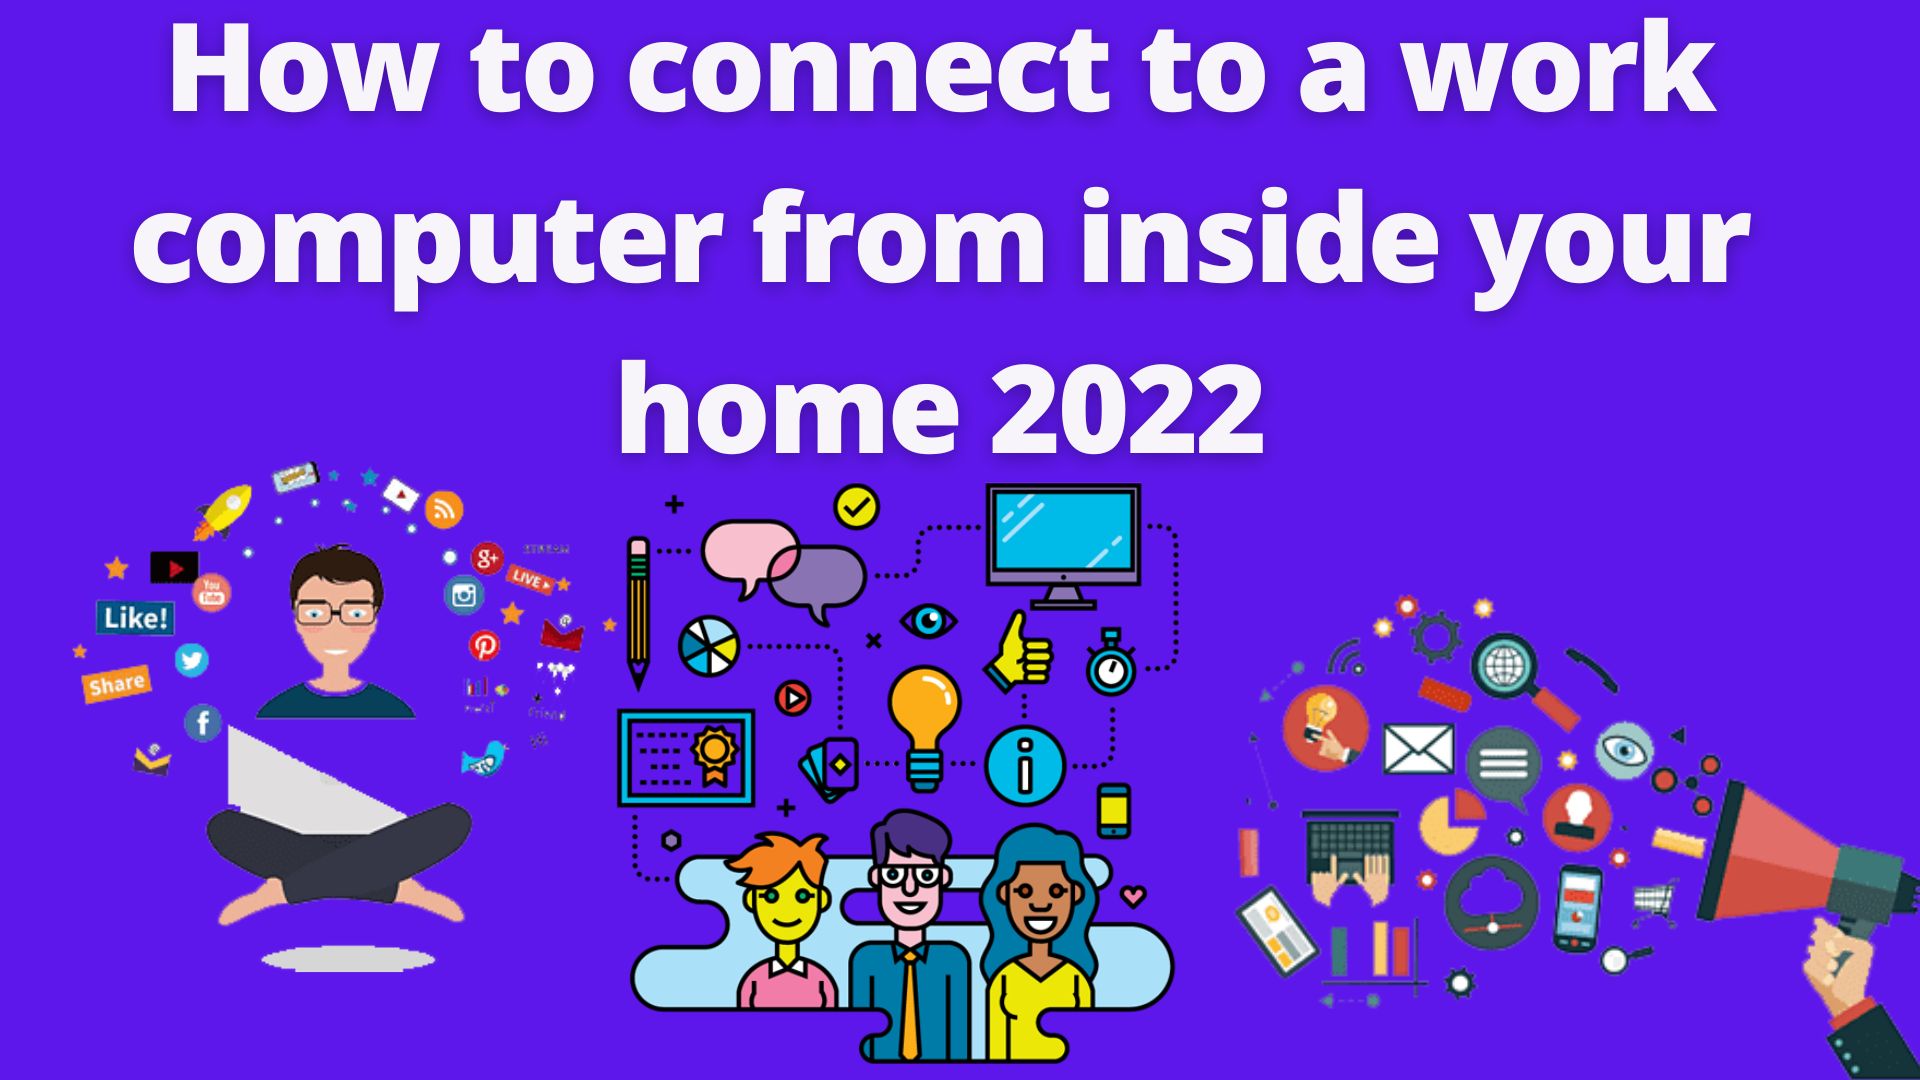 How to connect to a work computer from inside your home 2022